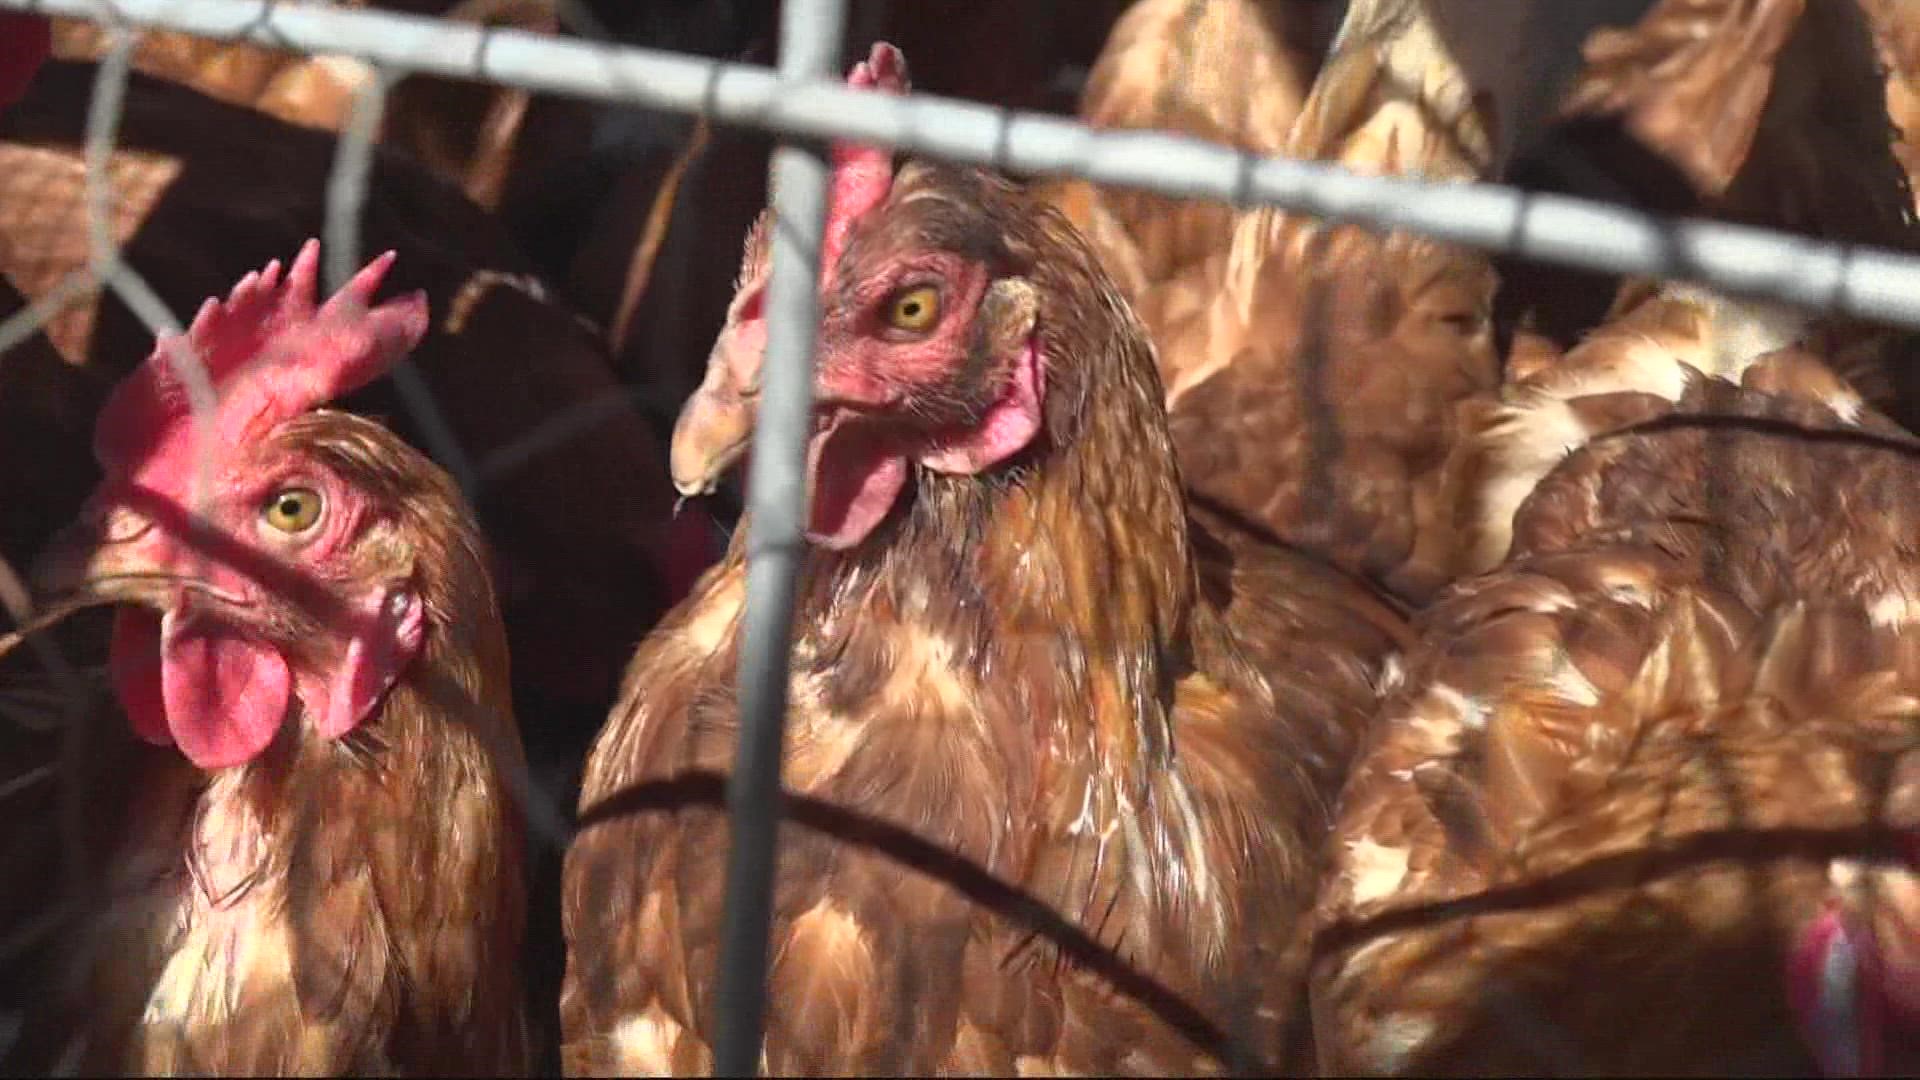 More people are starting backyard chicken coops amid high egg prices, one local farmer says!